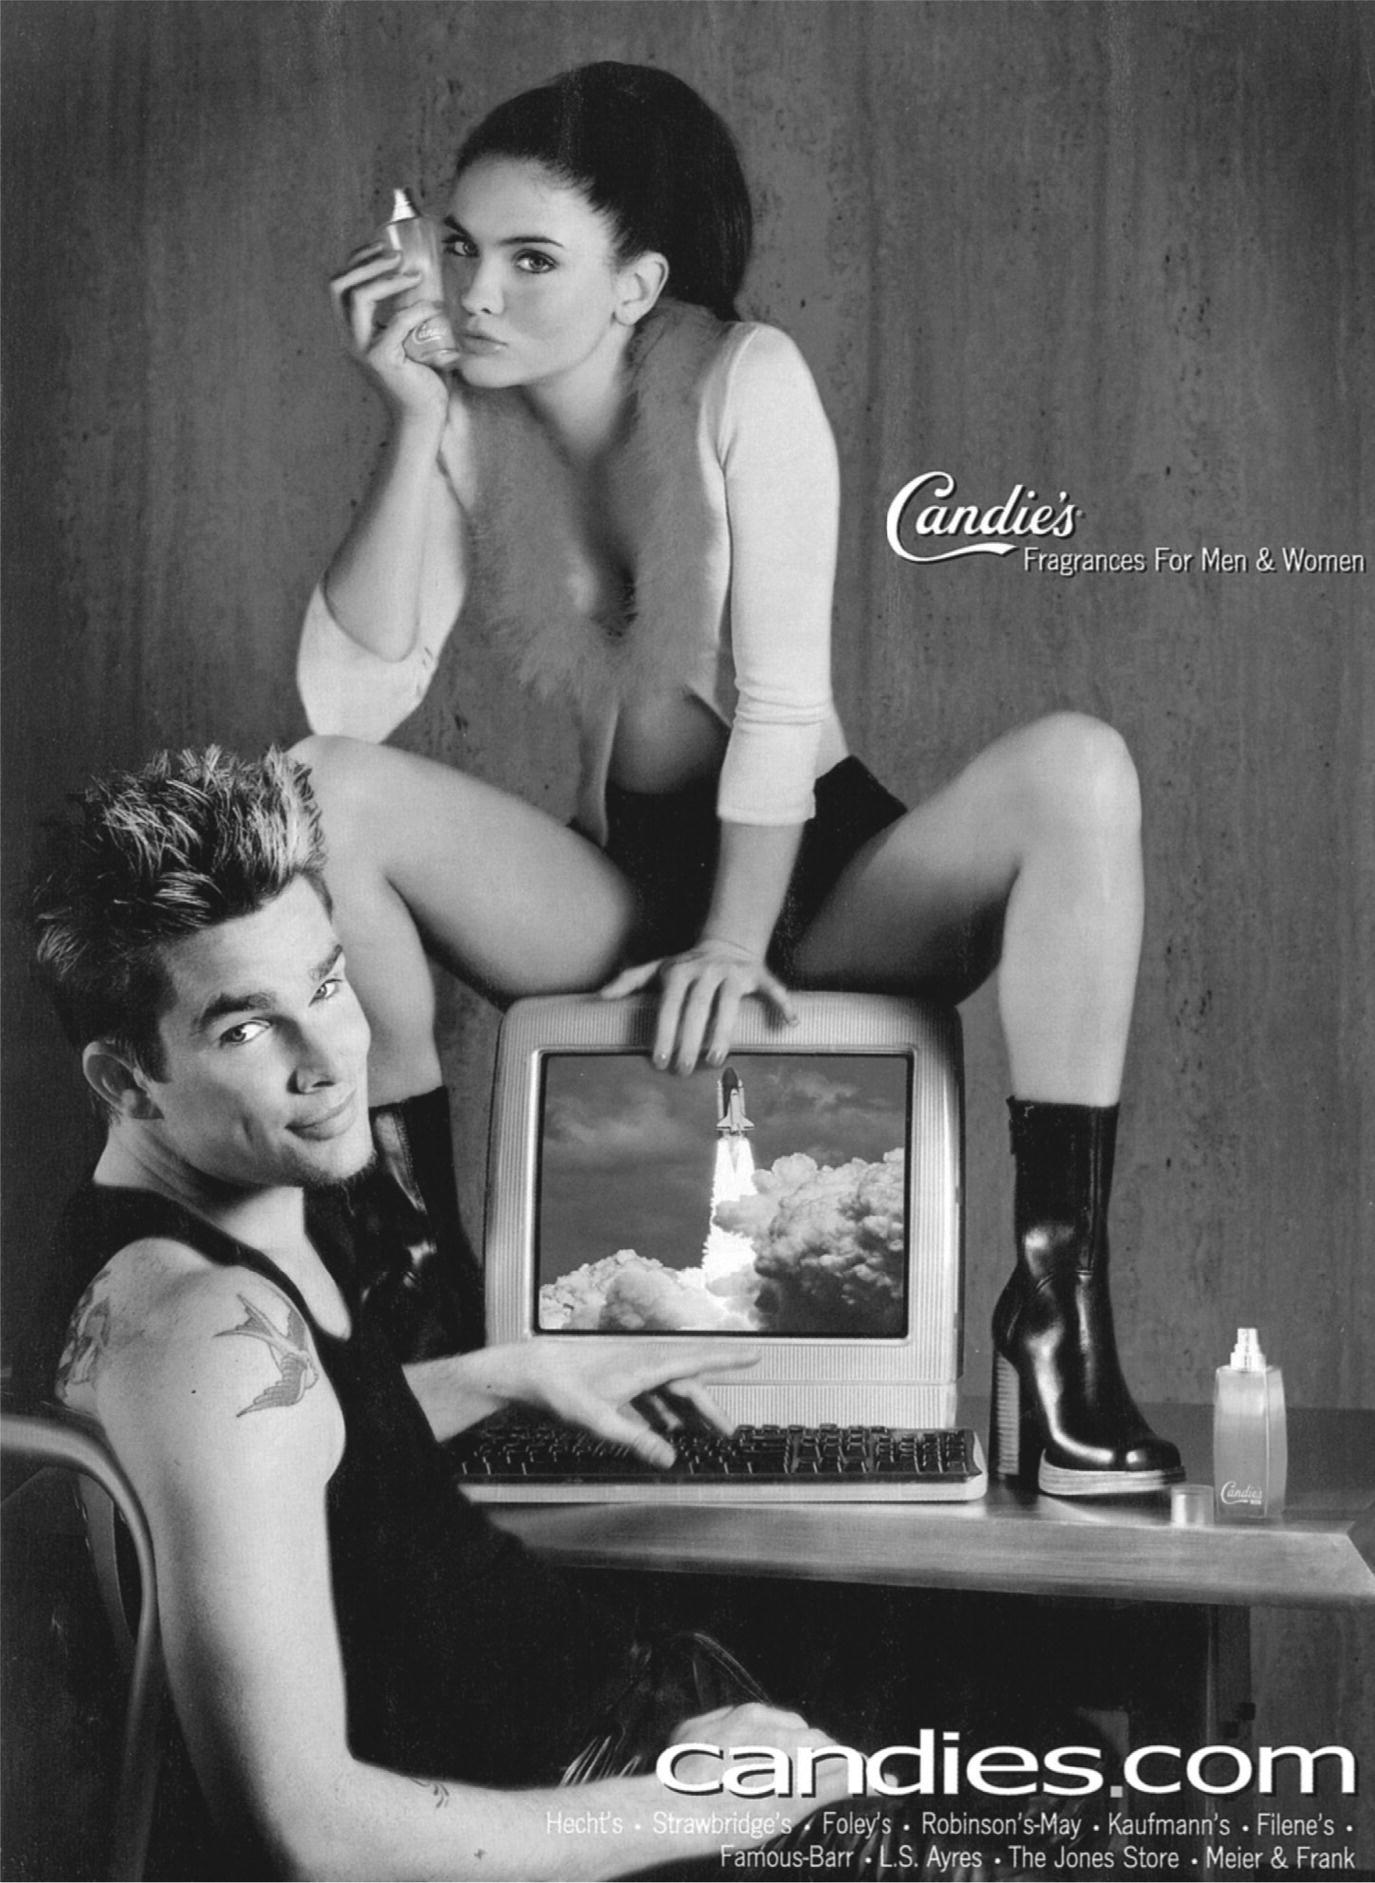 Candie's Fragrances advertisement displaying a man typing on the keyboard and a woman sitting on the monitor.